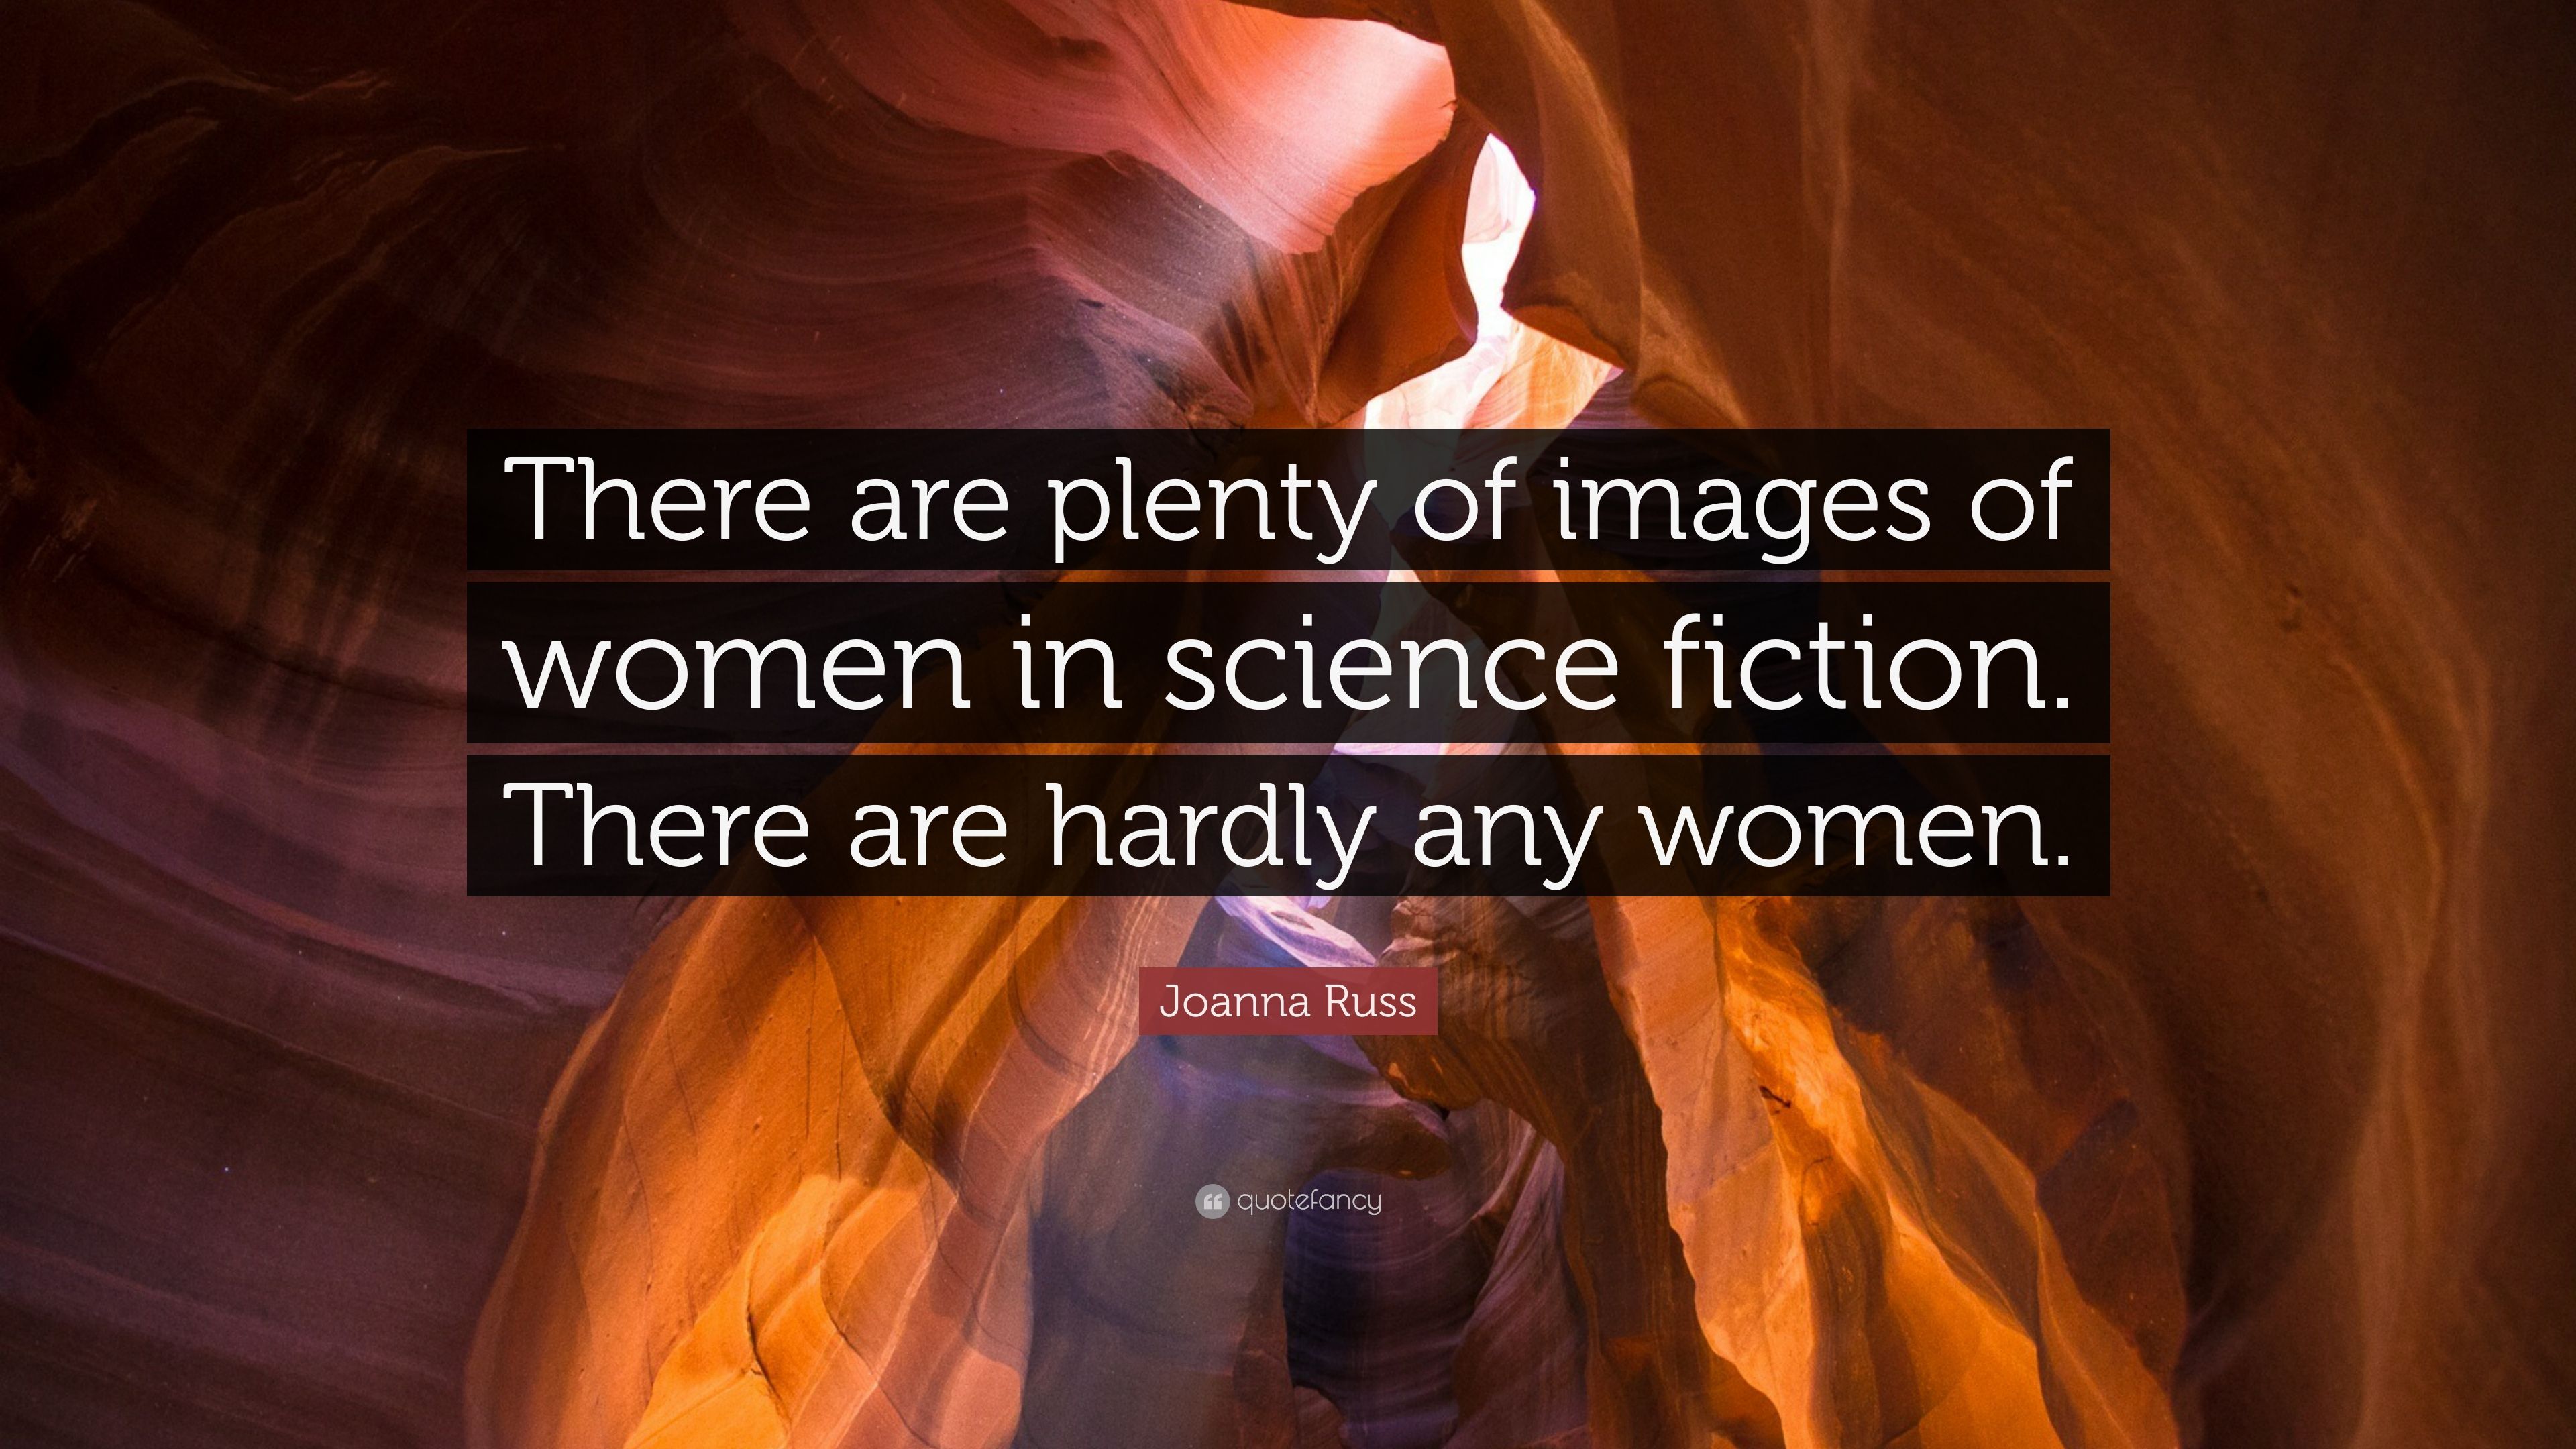 Joanna Russ Quote: “There are plenty of image of women in science